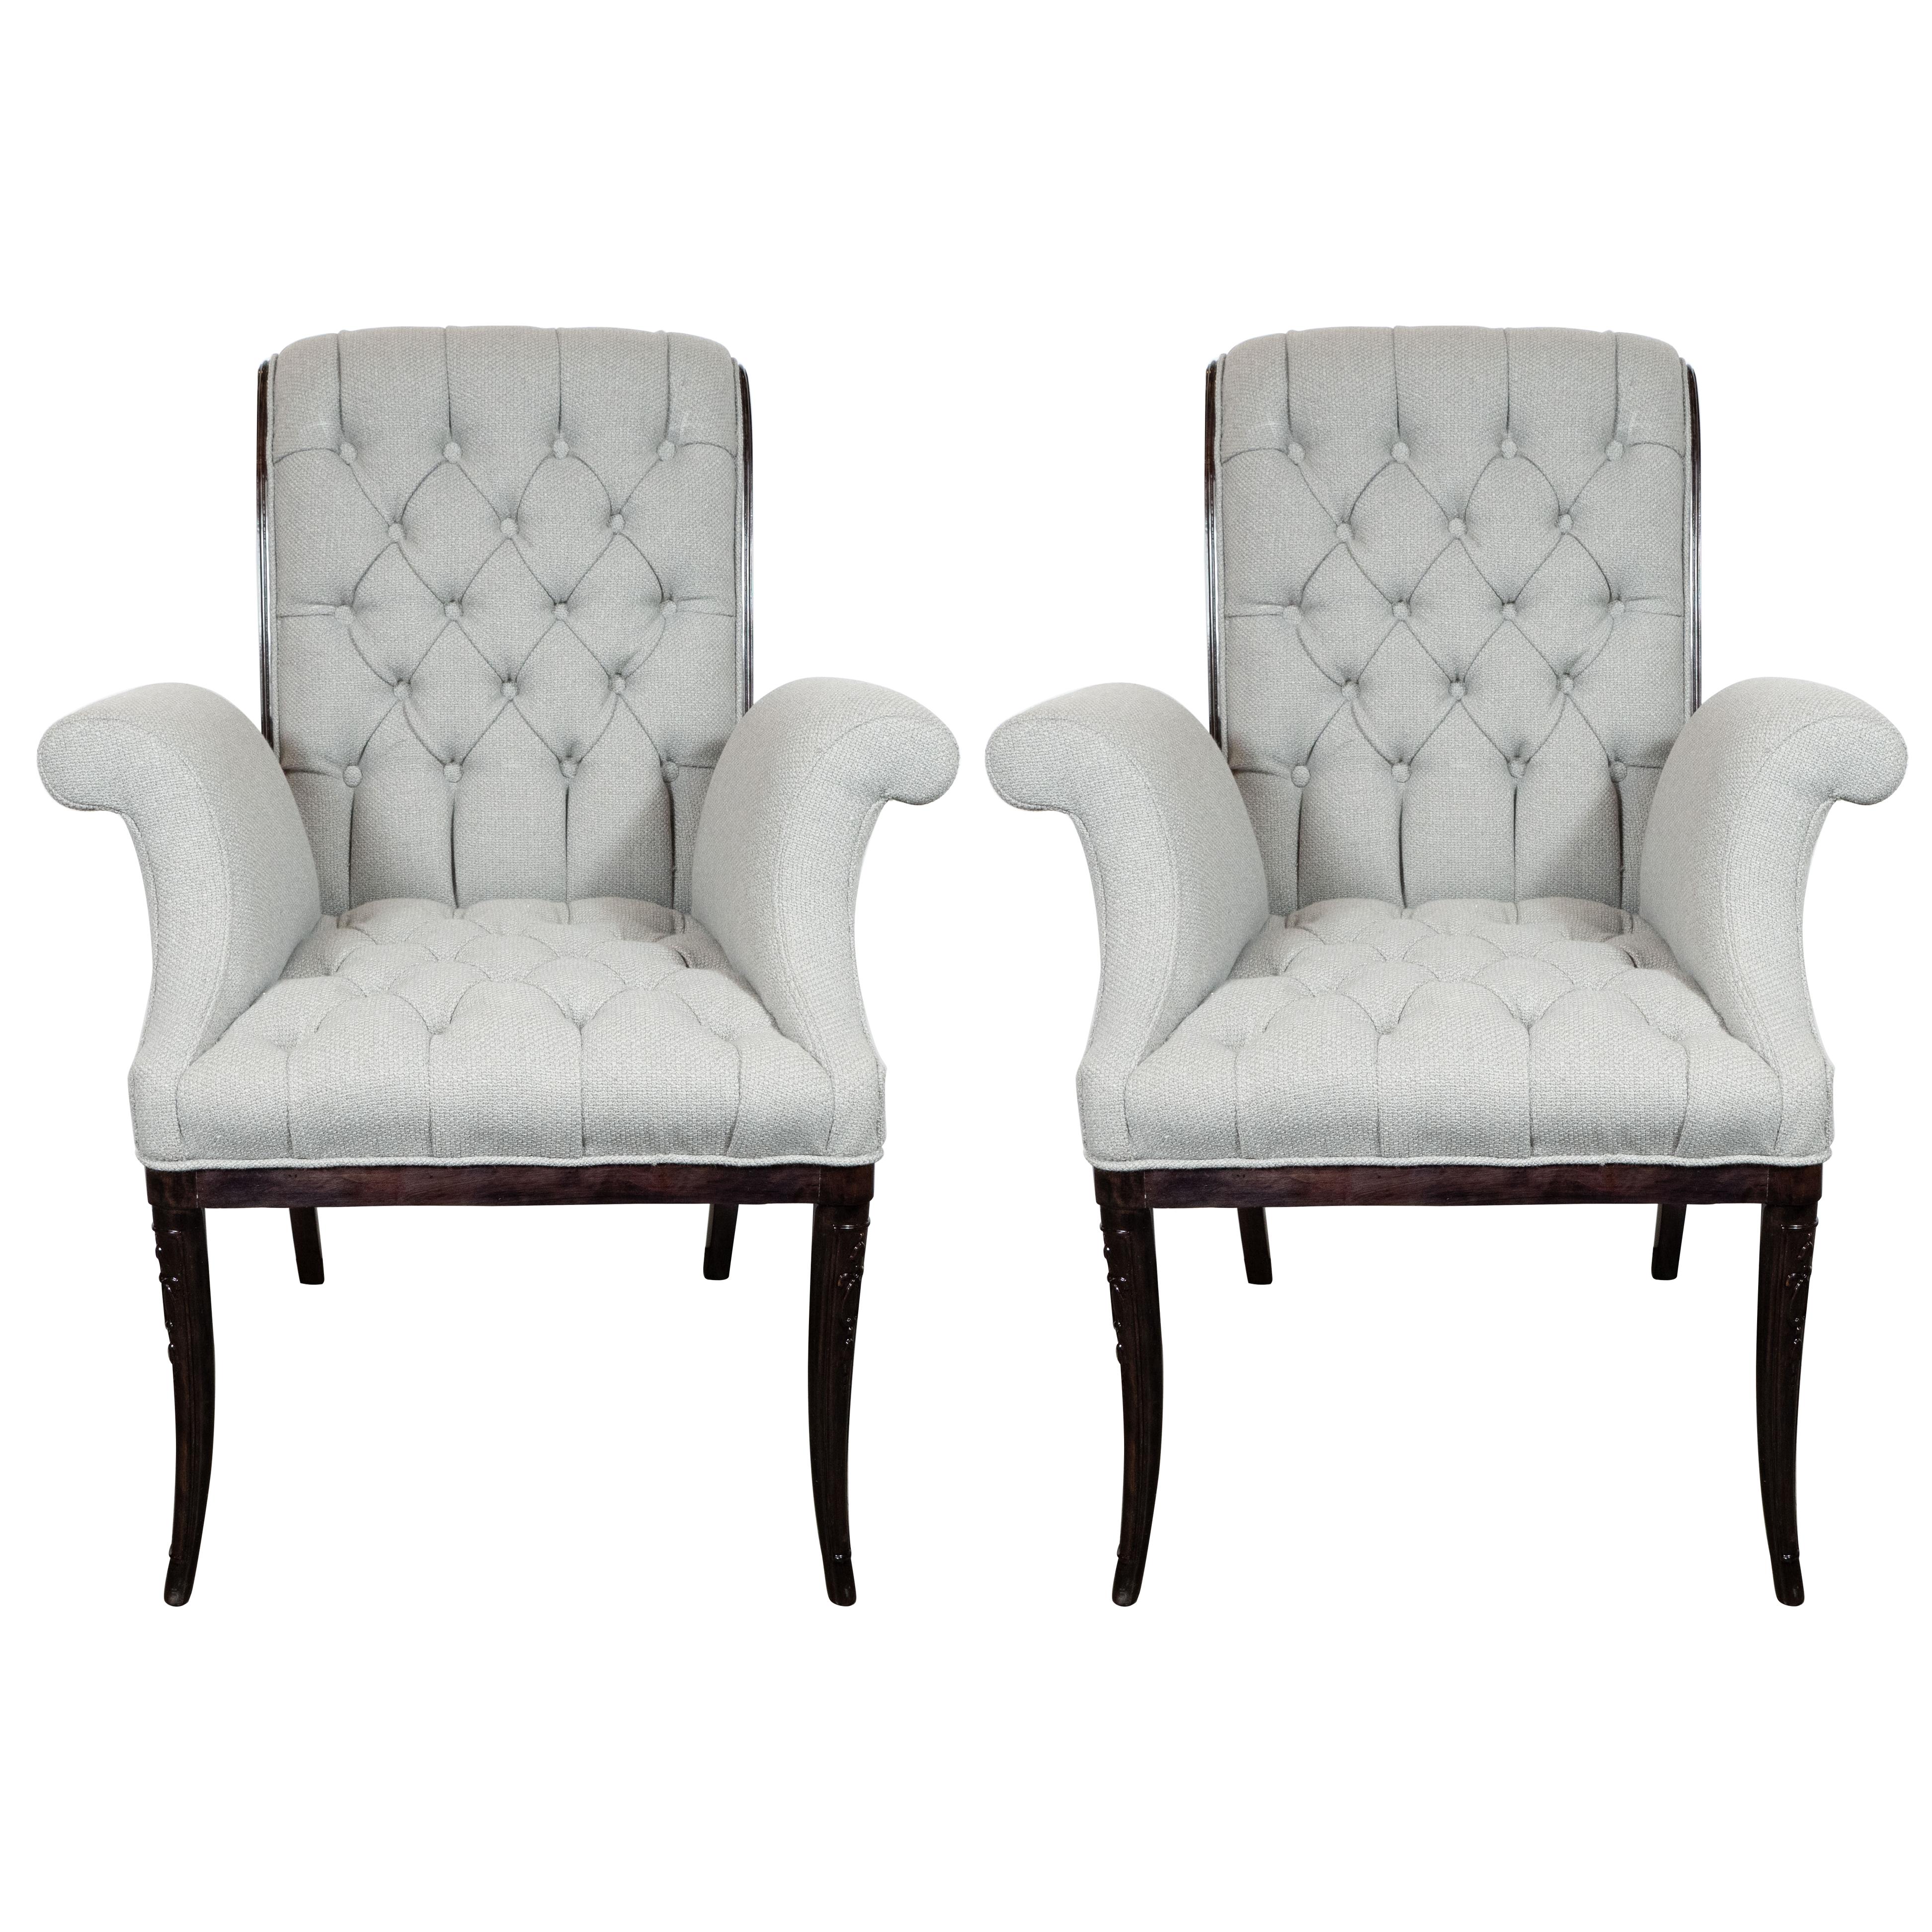 Pair of Hollywood Tufted Button Back Scroll Form Side Chairs by Grosfeld House For Sale